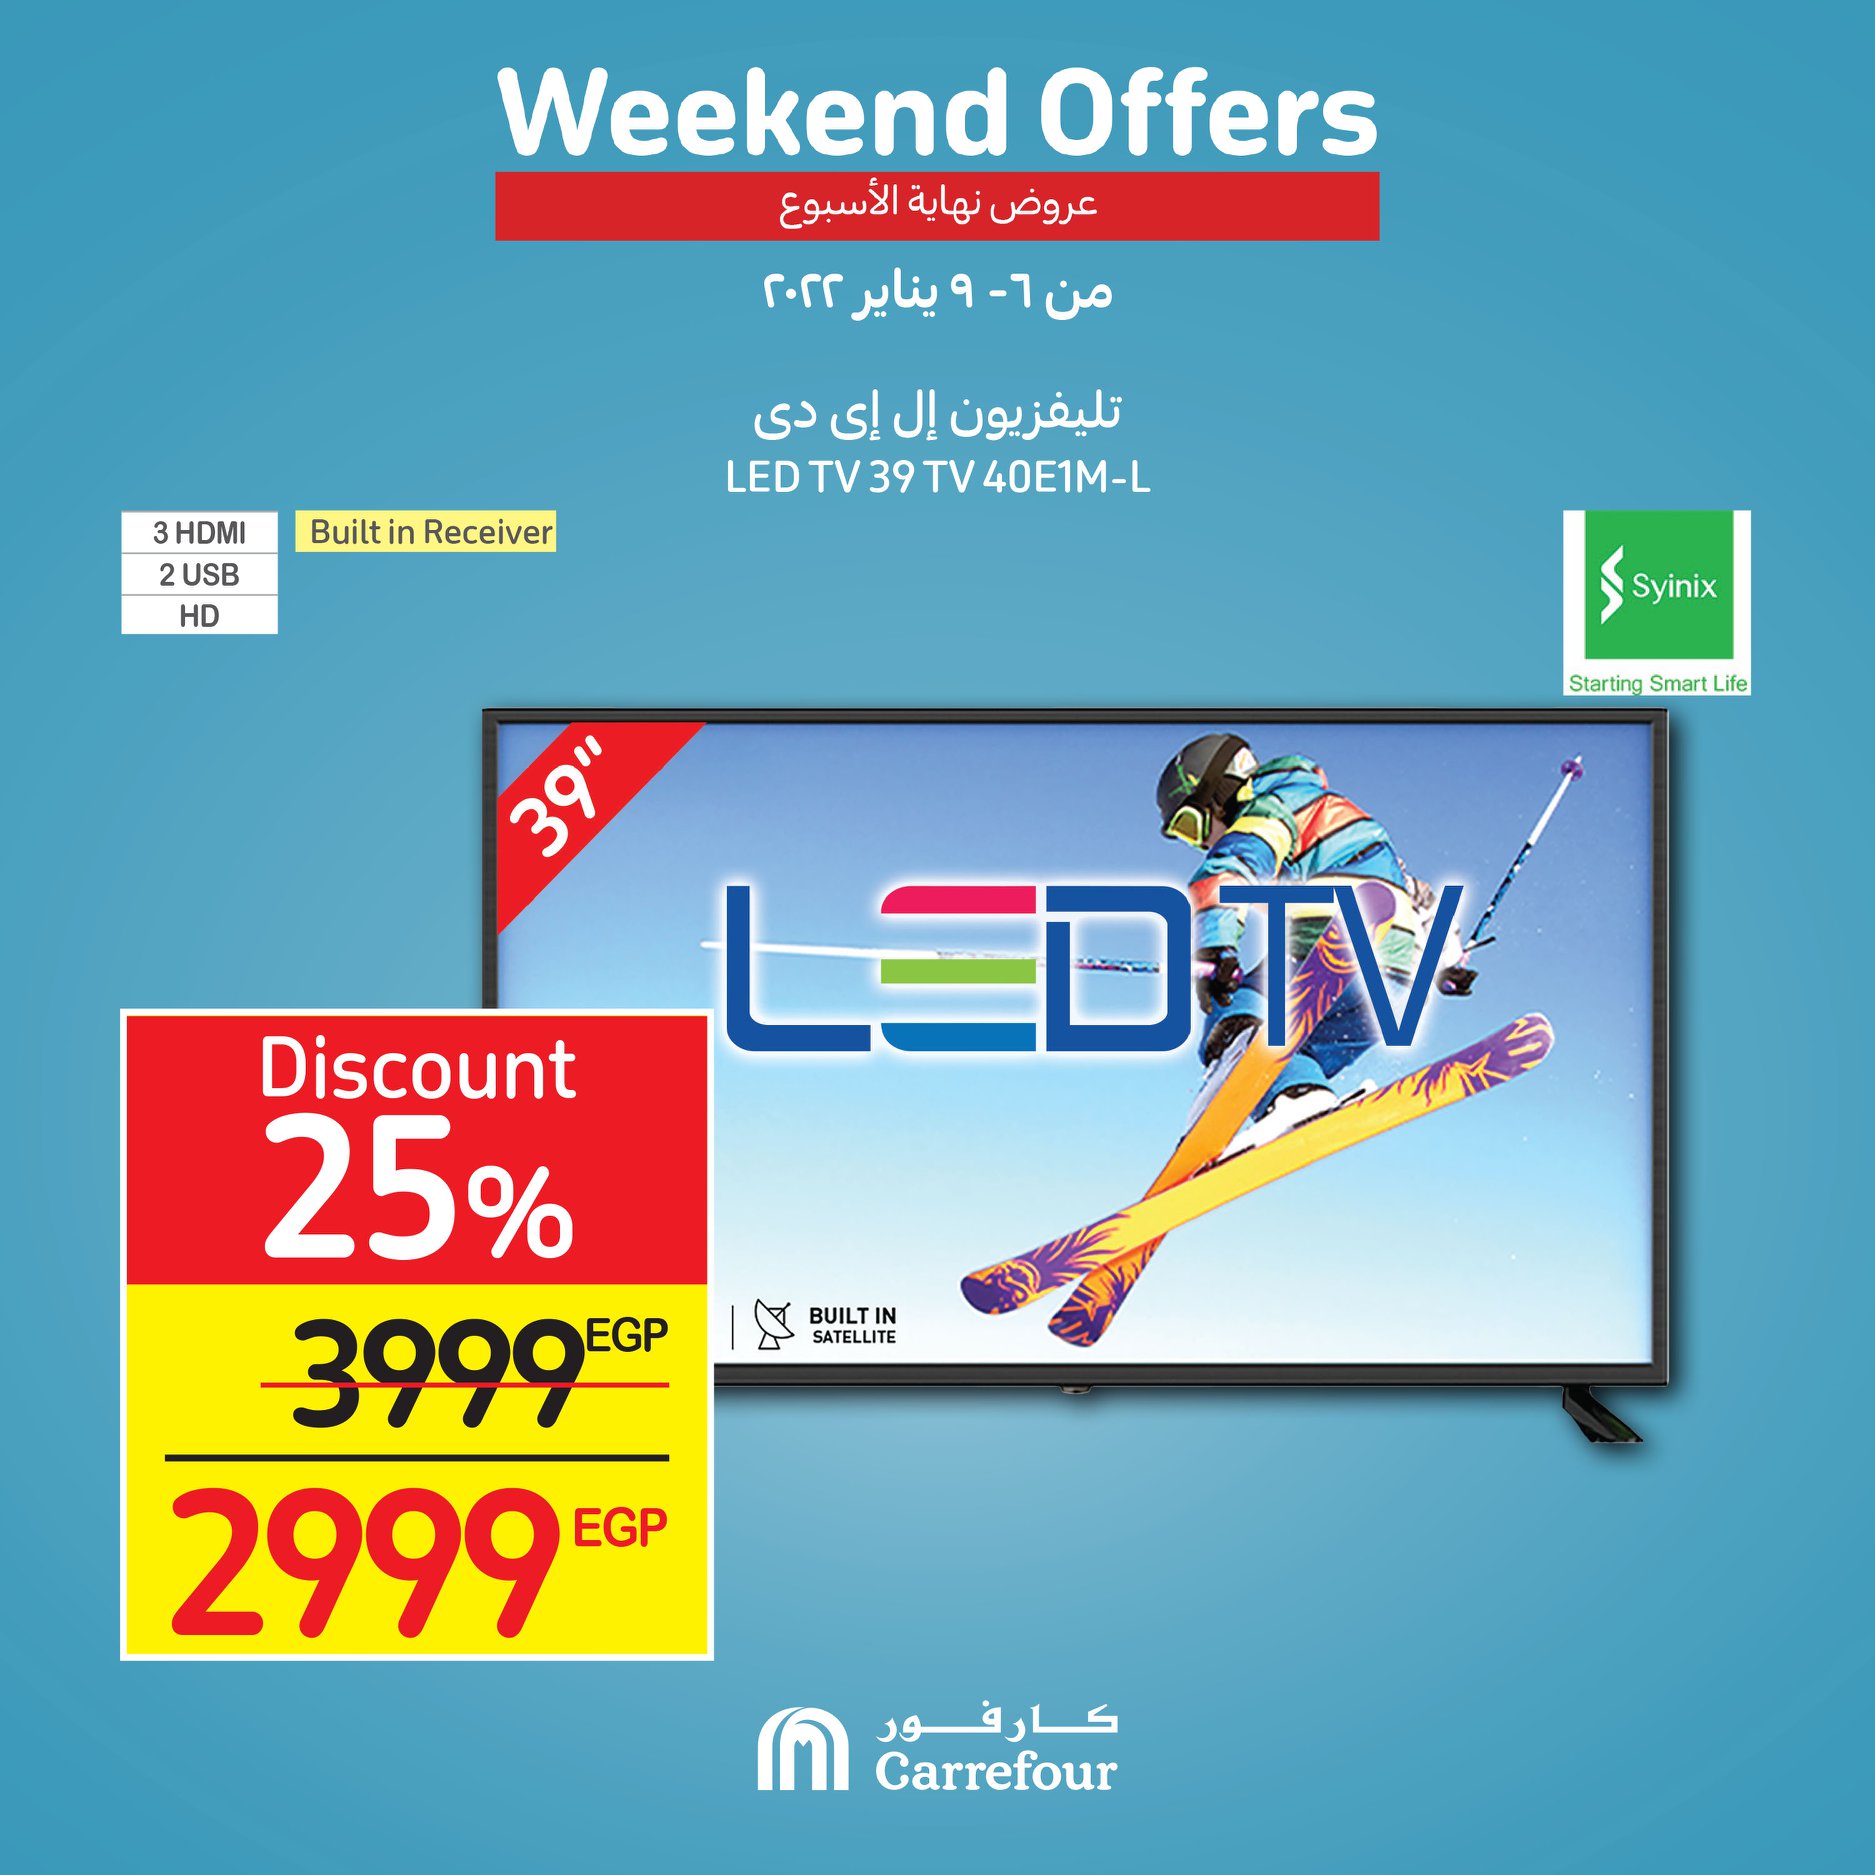 Now, the strongest offers and surprises from Carrefour, half-price discounts, at Weekend, until January 16th, 3